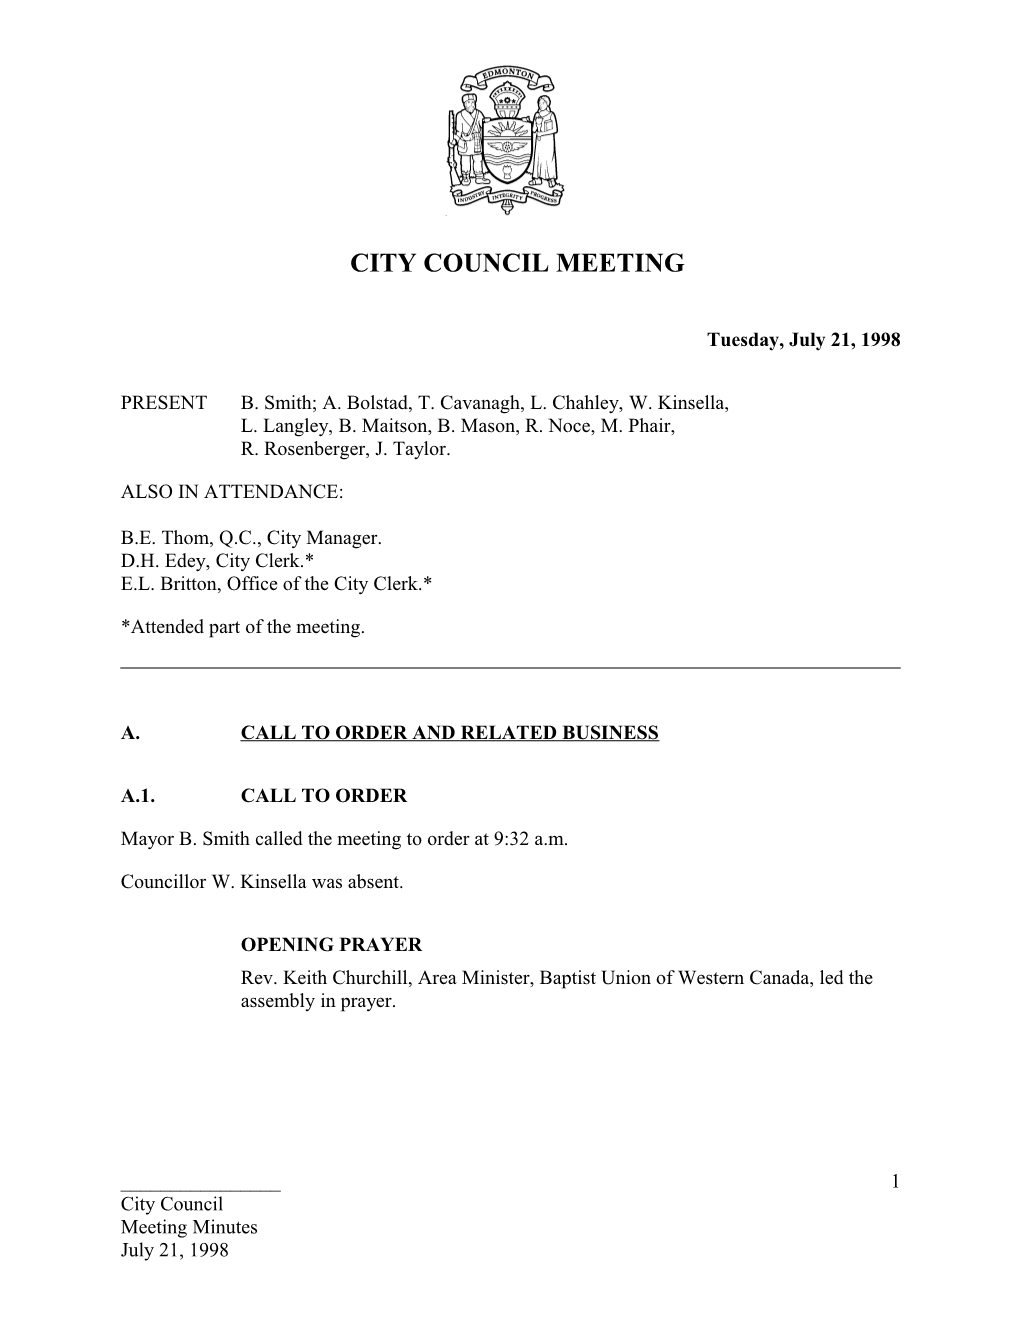 Minutes for City Council July 21, 1998 Meeting